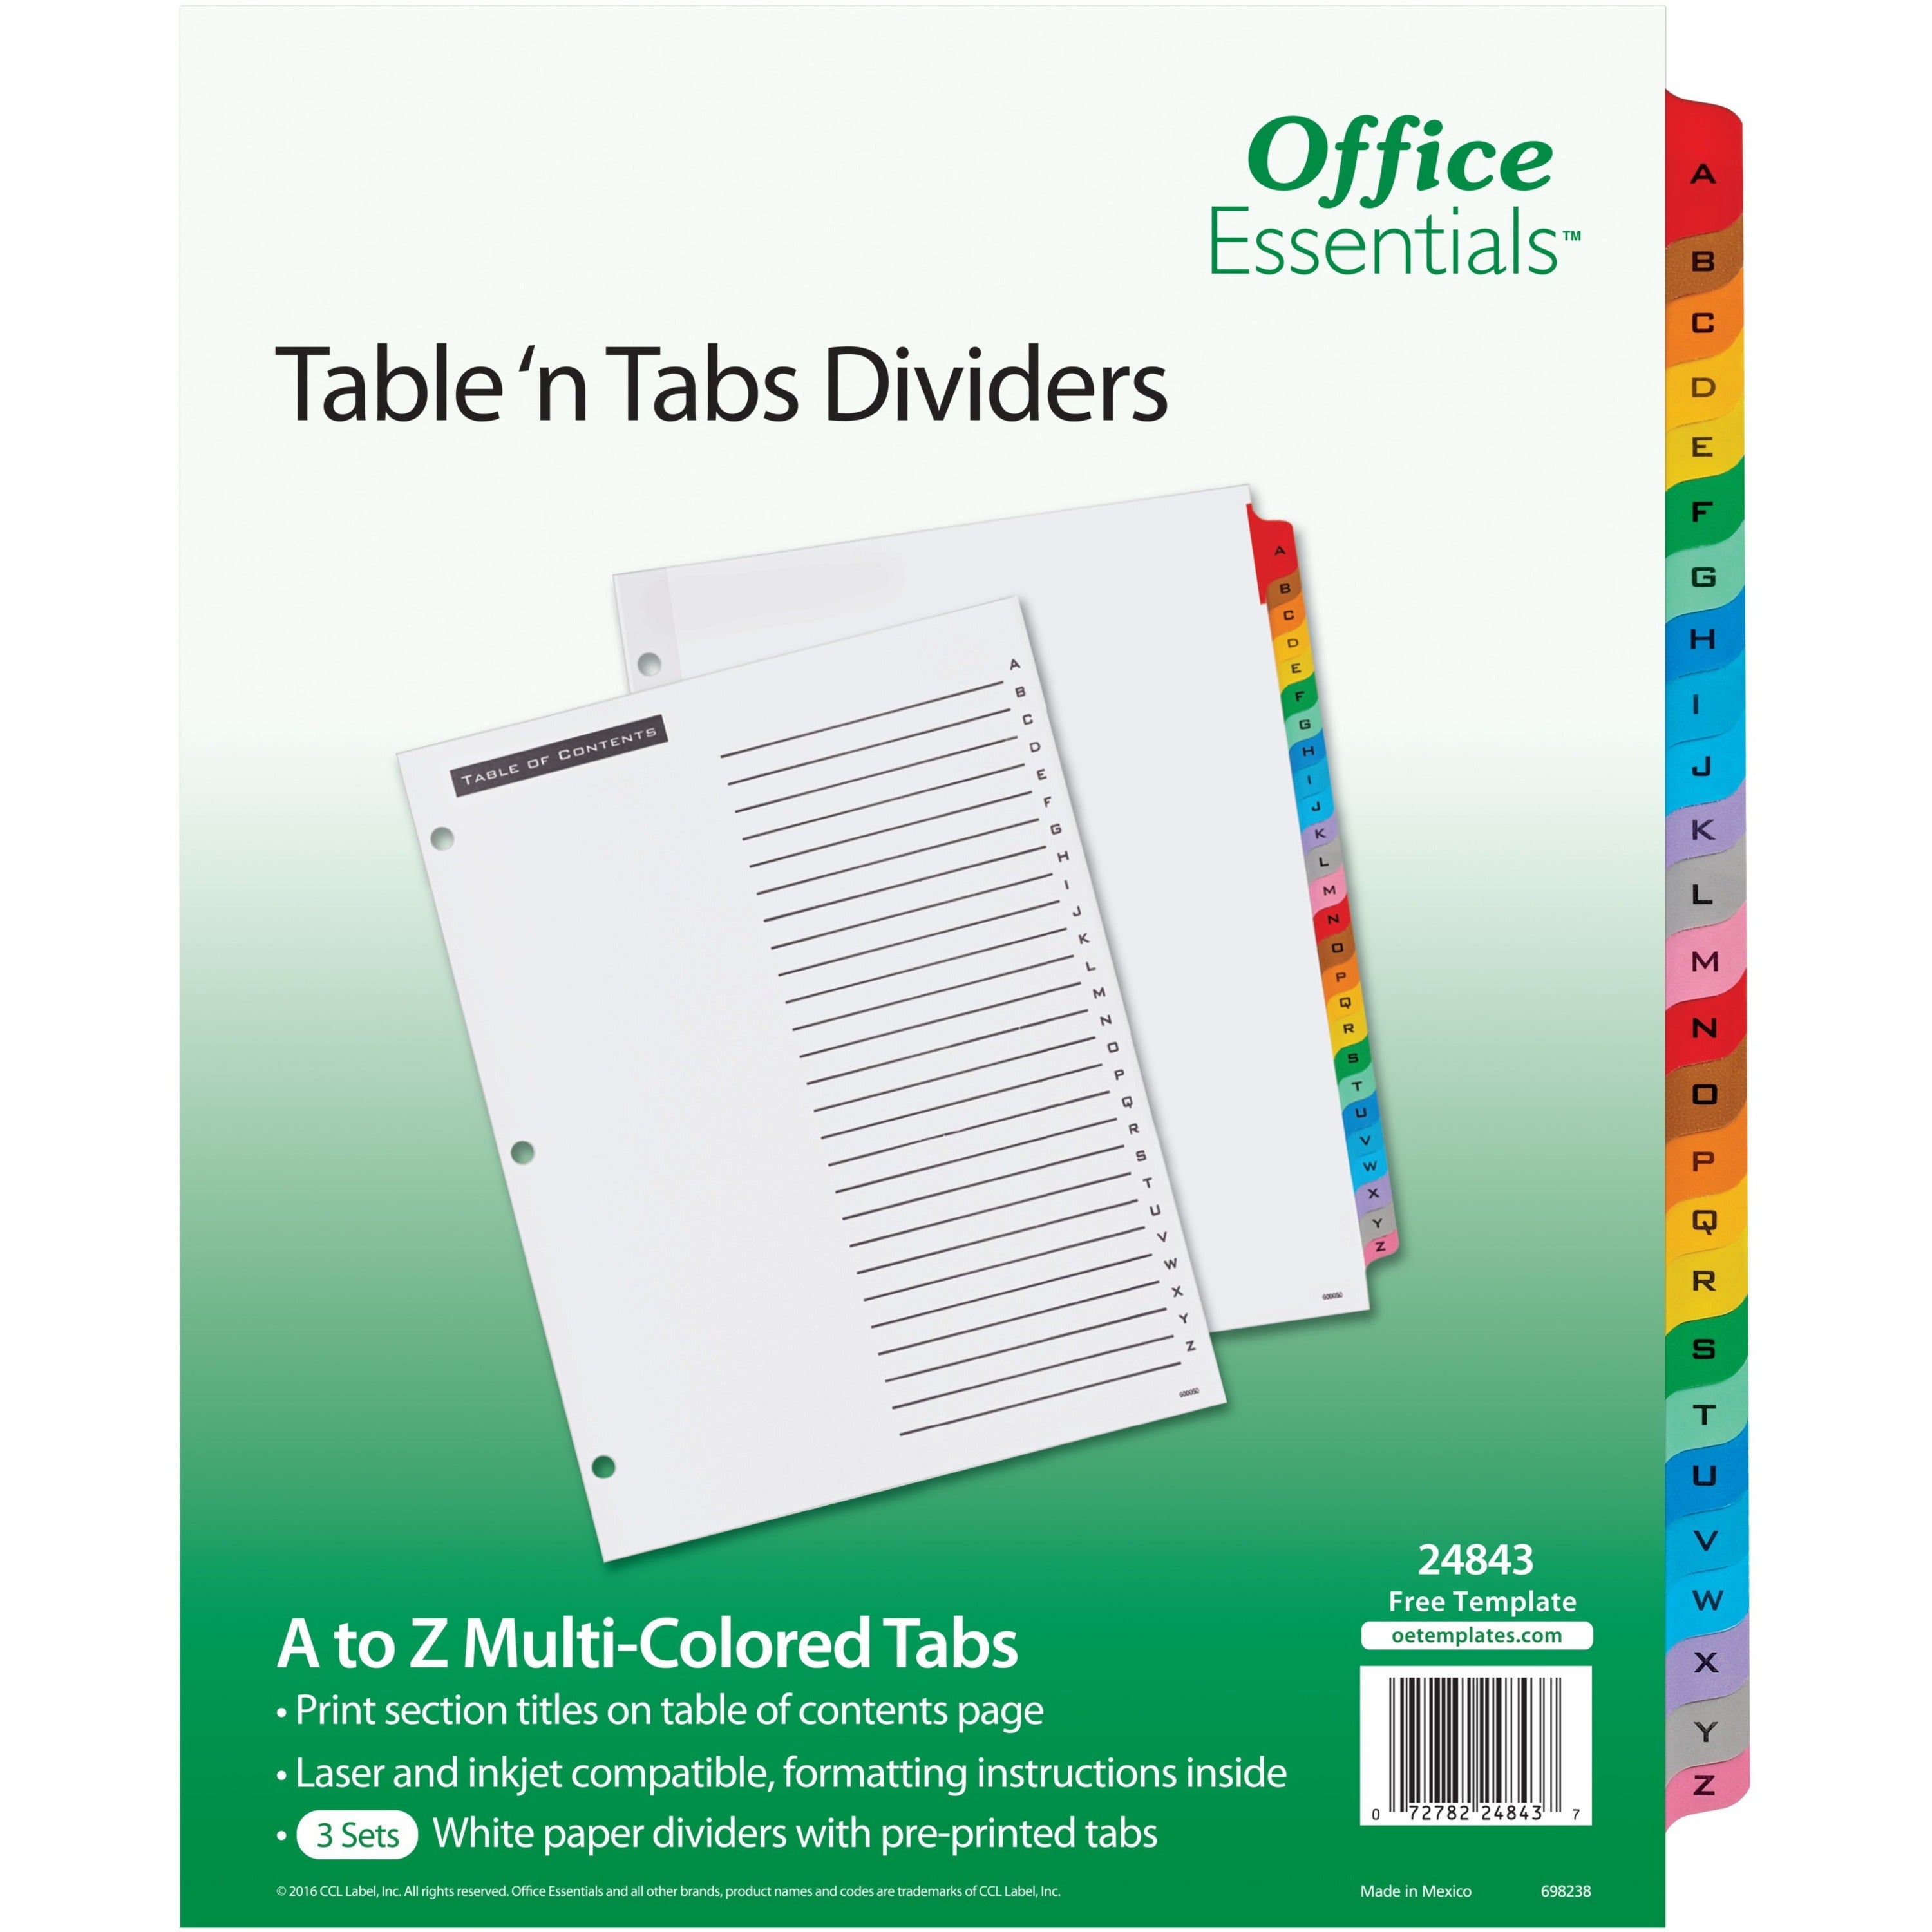 avery-table-n-tabs-multicolored-tab-a-z-dividers-288-x-dividers-288-tabs-a-z-26-tabs-set-85-divider-width-x-11-divider-length-3-hole-punched-white-paper-divider-multicolor-paper-tabs-4-carton_ave24843 - 1